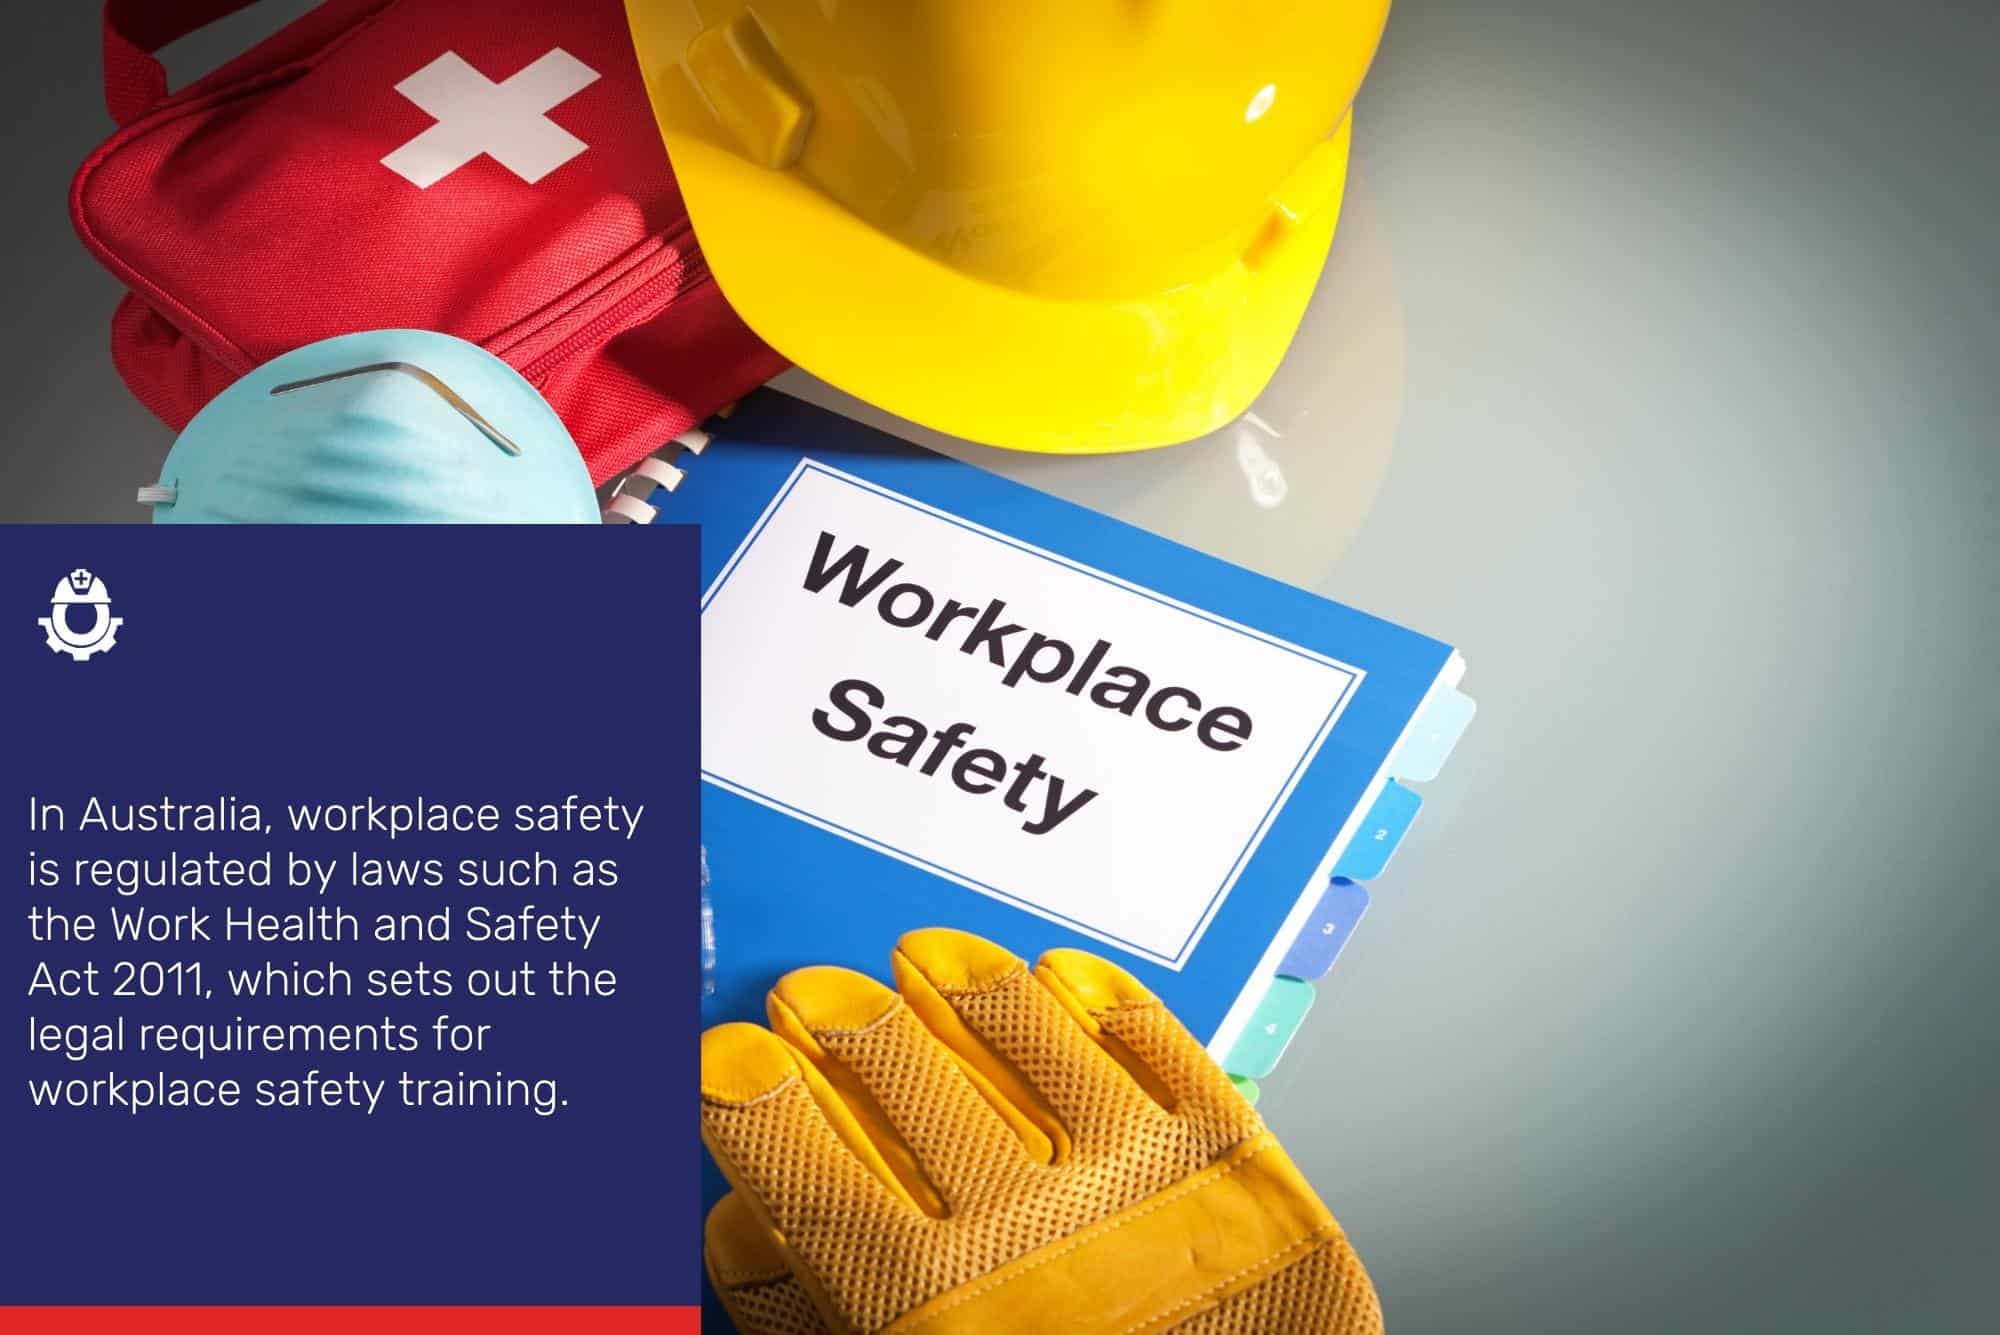 Legal requirements for workplace safety training in Australia